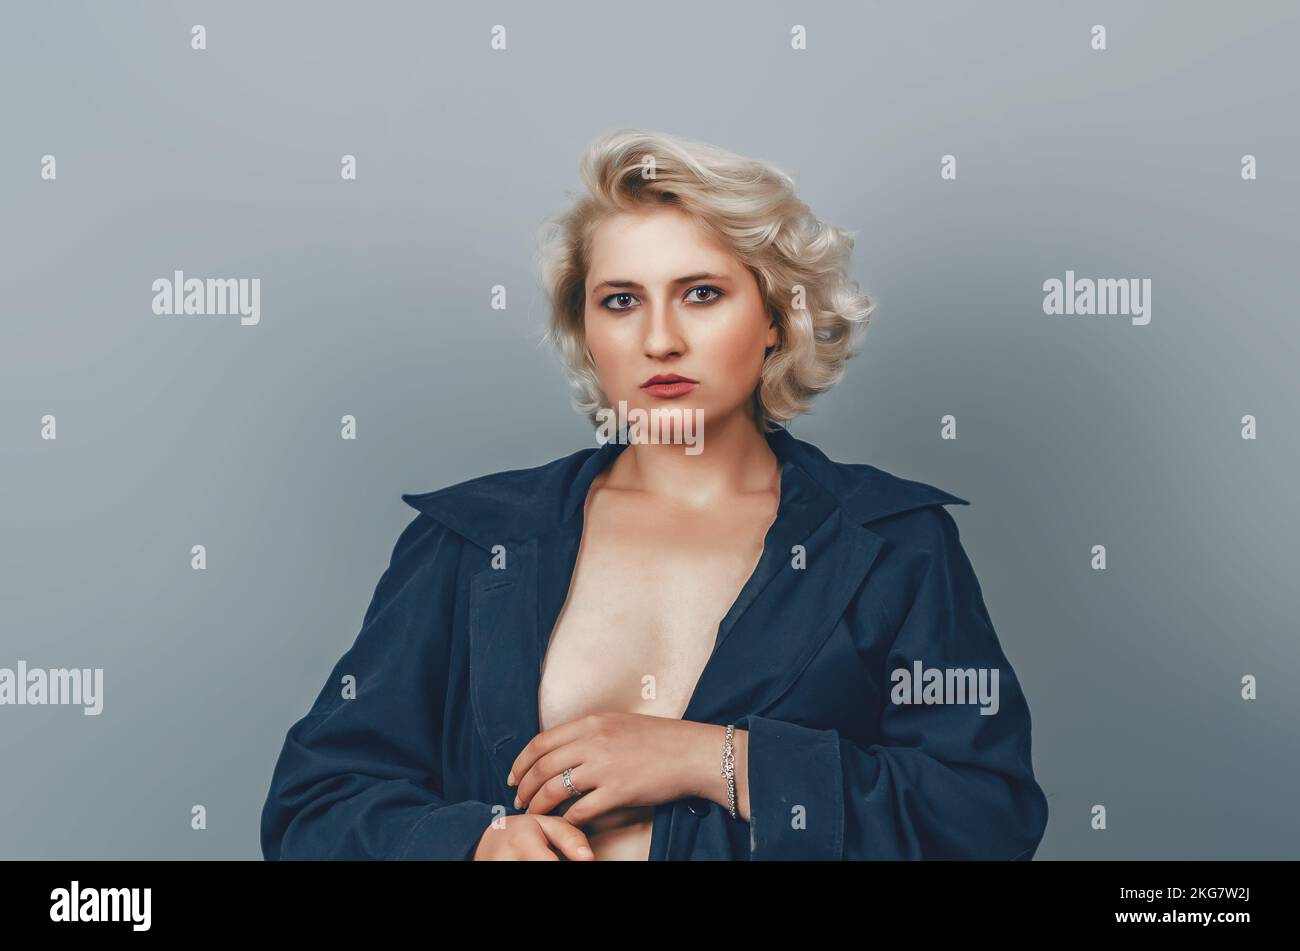 Pretty topless blonde girl in black raincoat, hand near face, looking at camera. Stock Photo